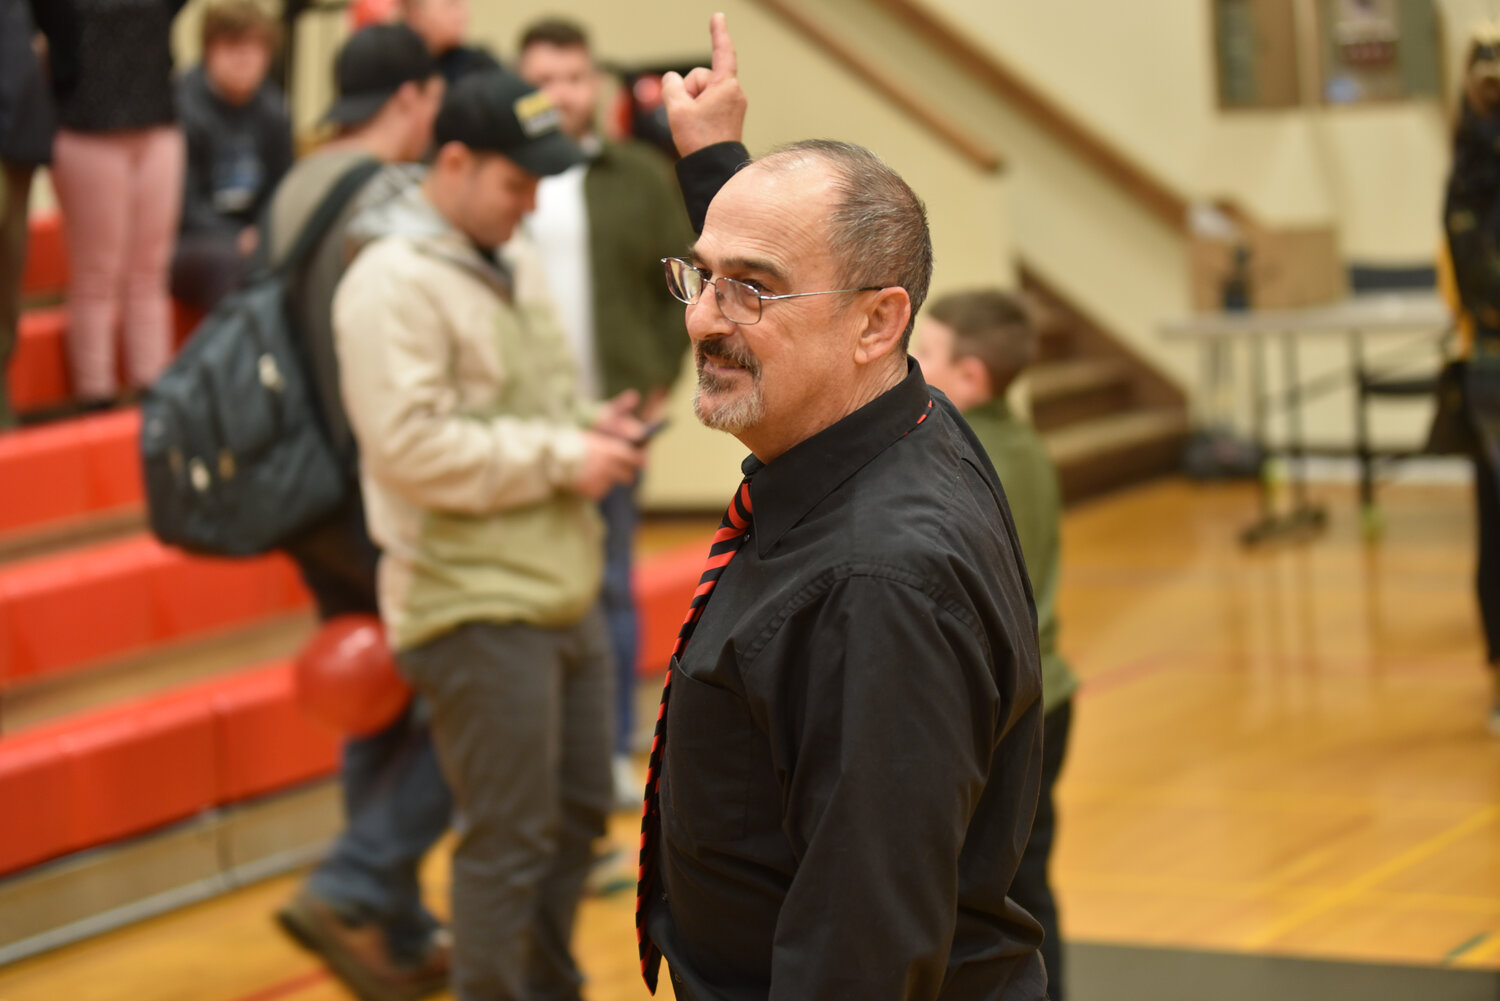 Yelm's head wrestling coach Gaylord Strand smiles and points to the scoreboard on Jan. 23 after the Tornados defeated the Bison, 37-36, in the "Bad to the Bone" dual.